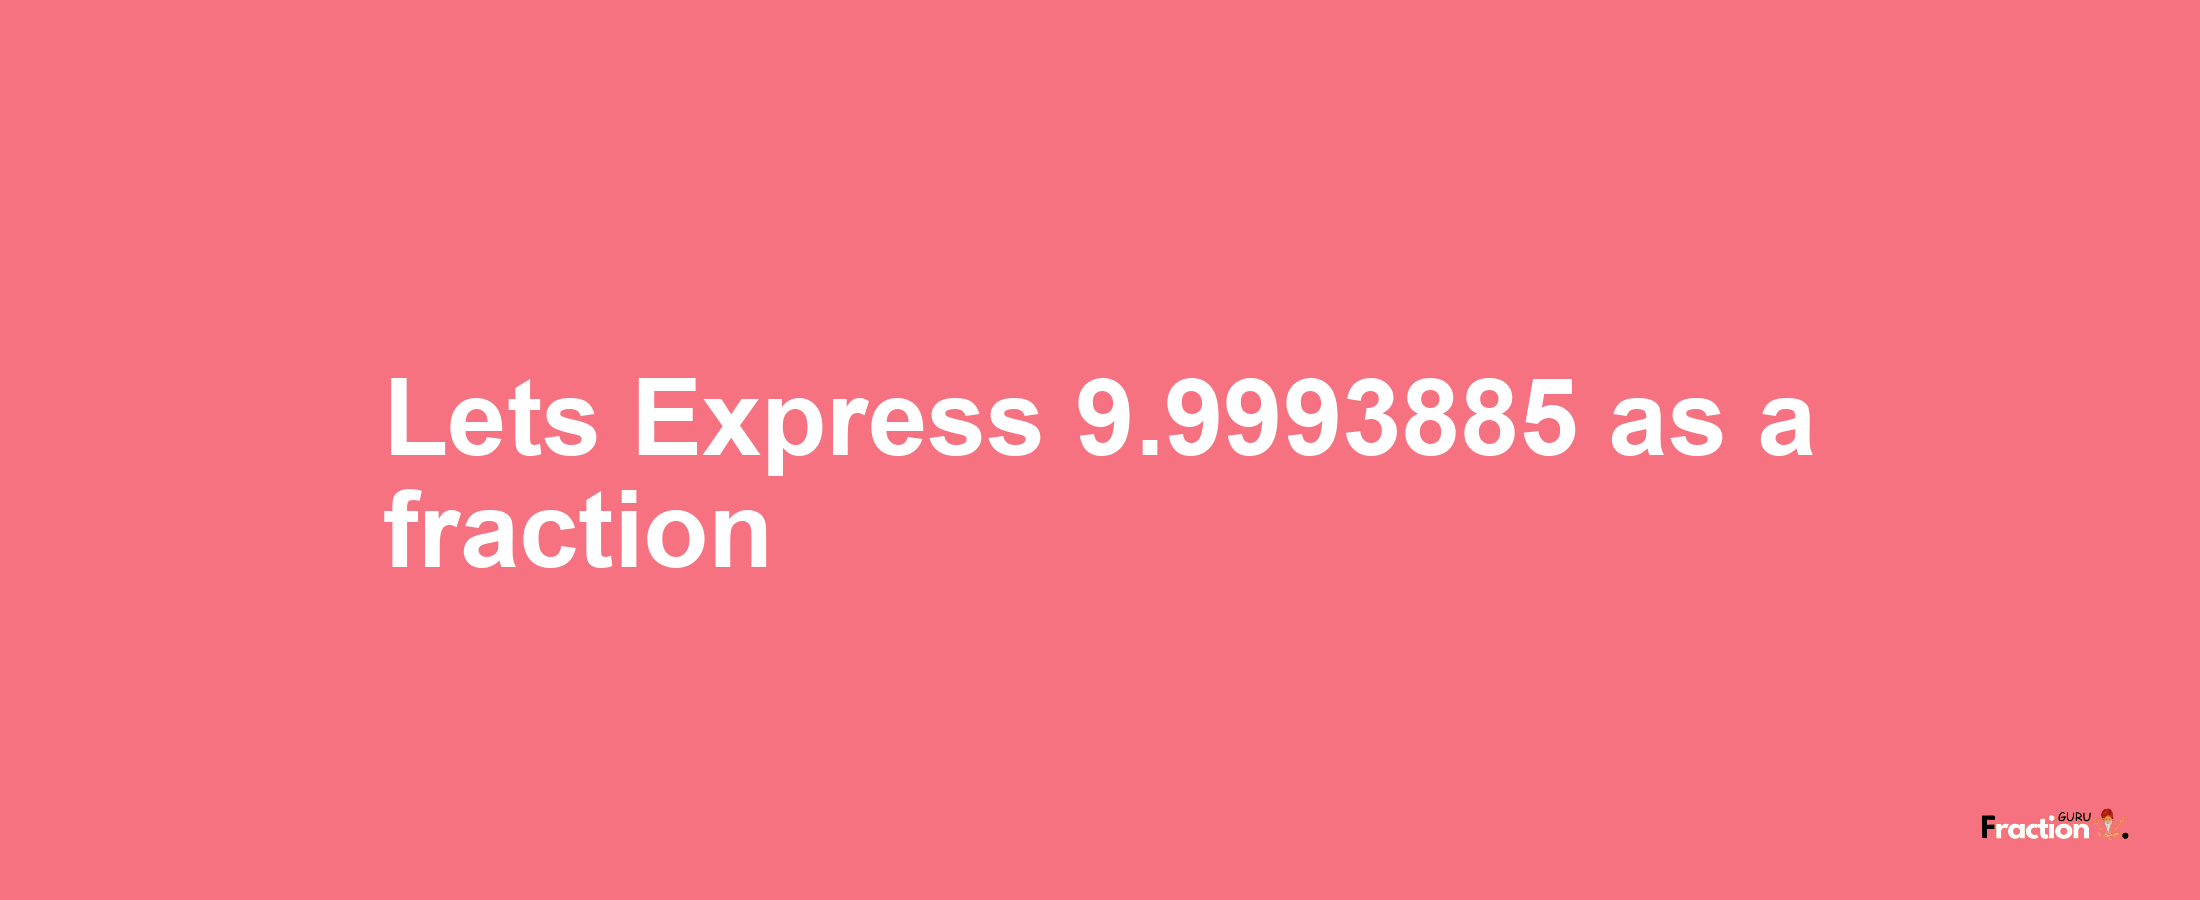 Lets Express 9.9993885 as afraction